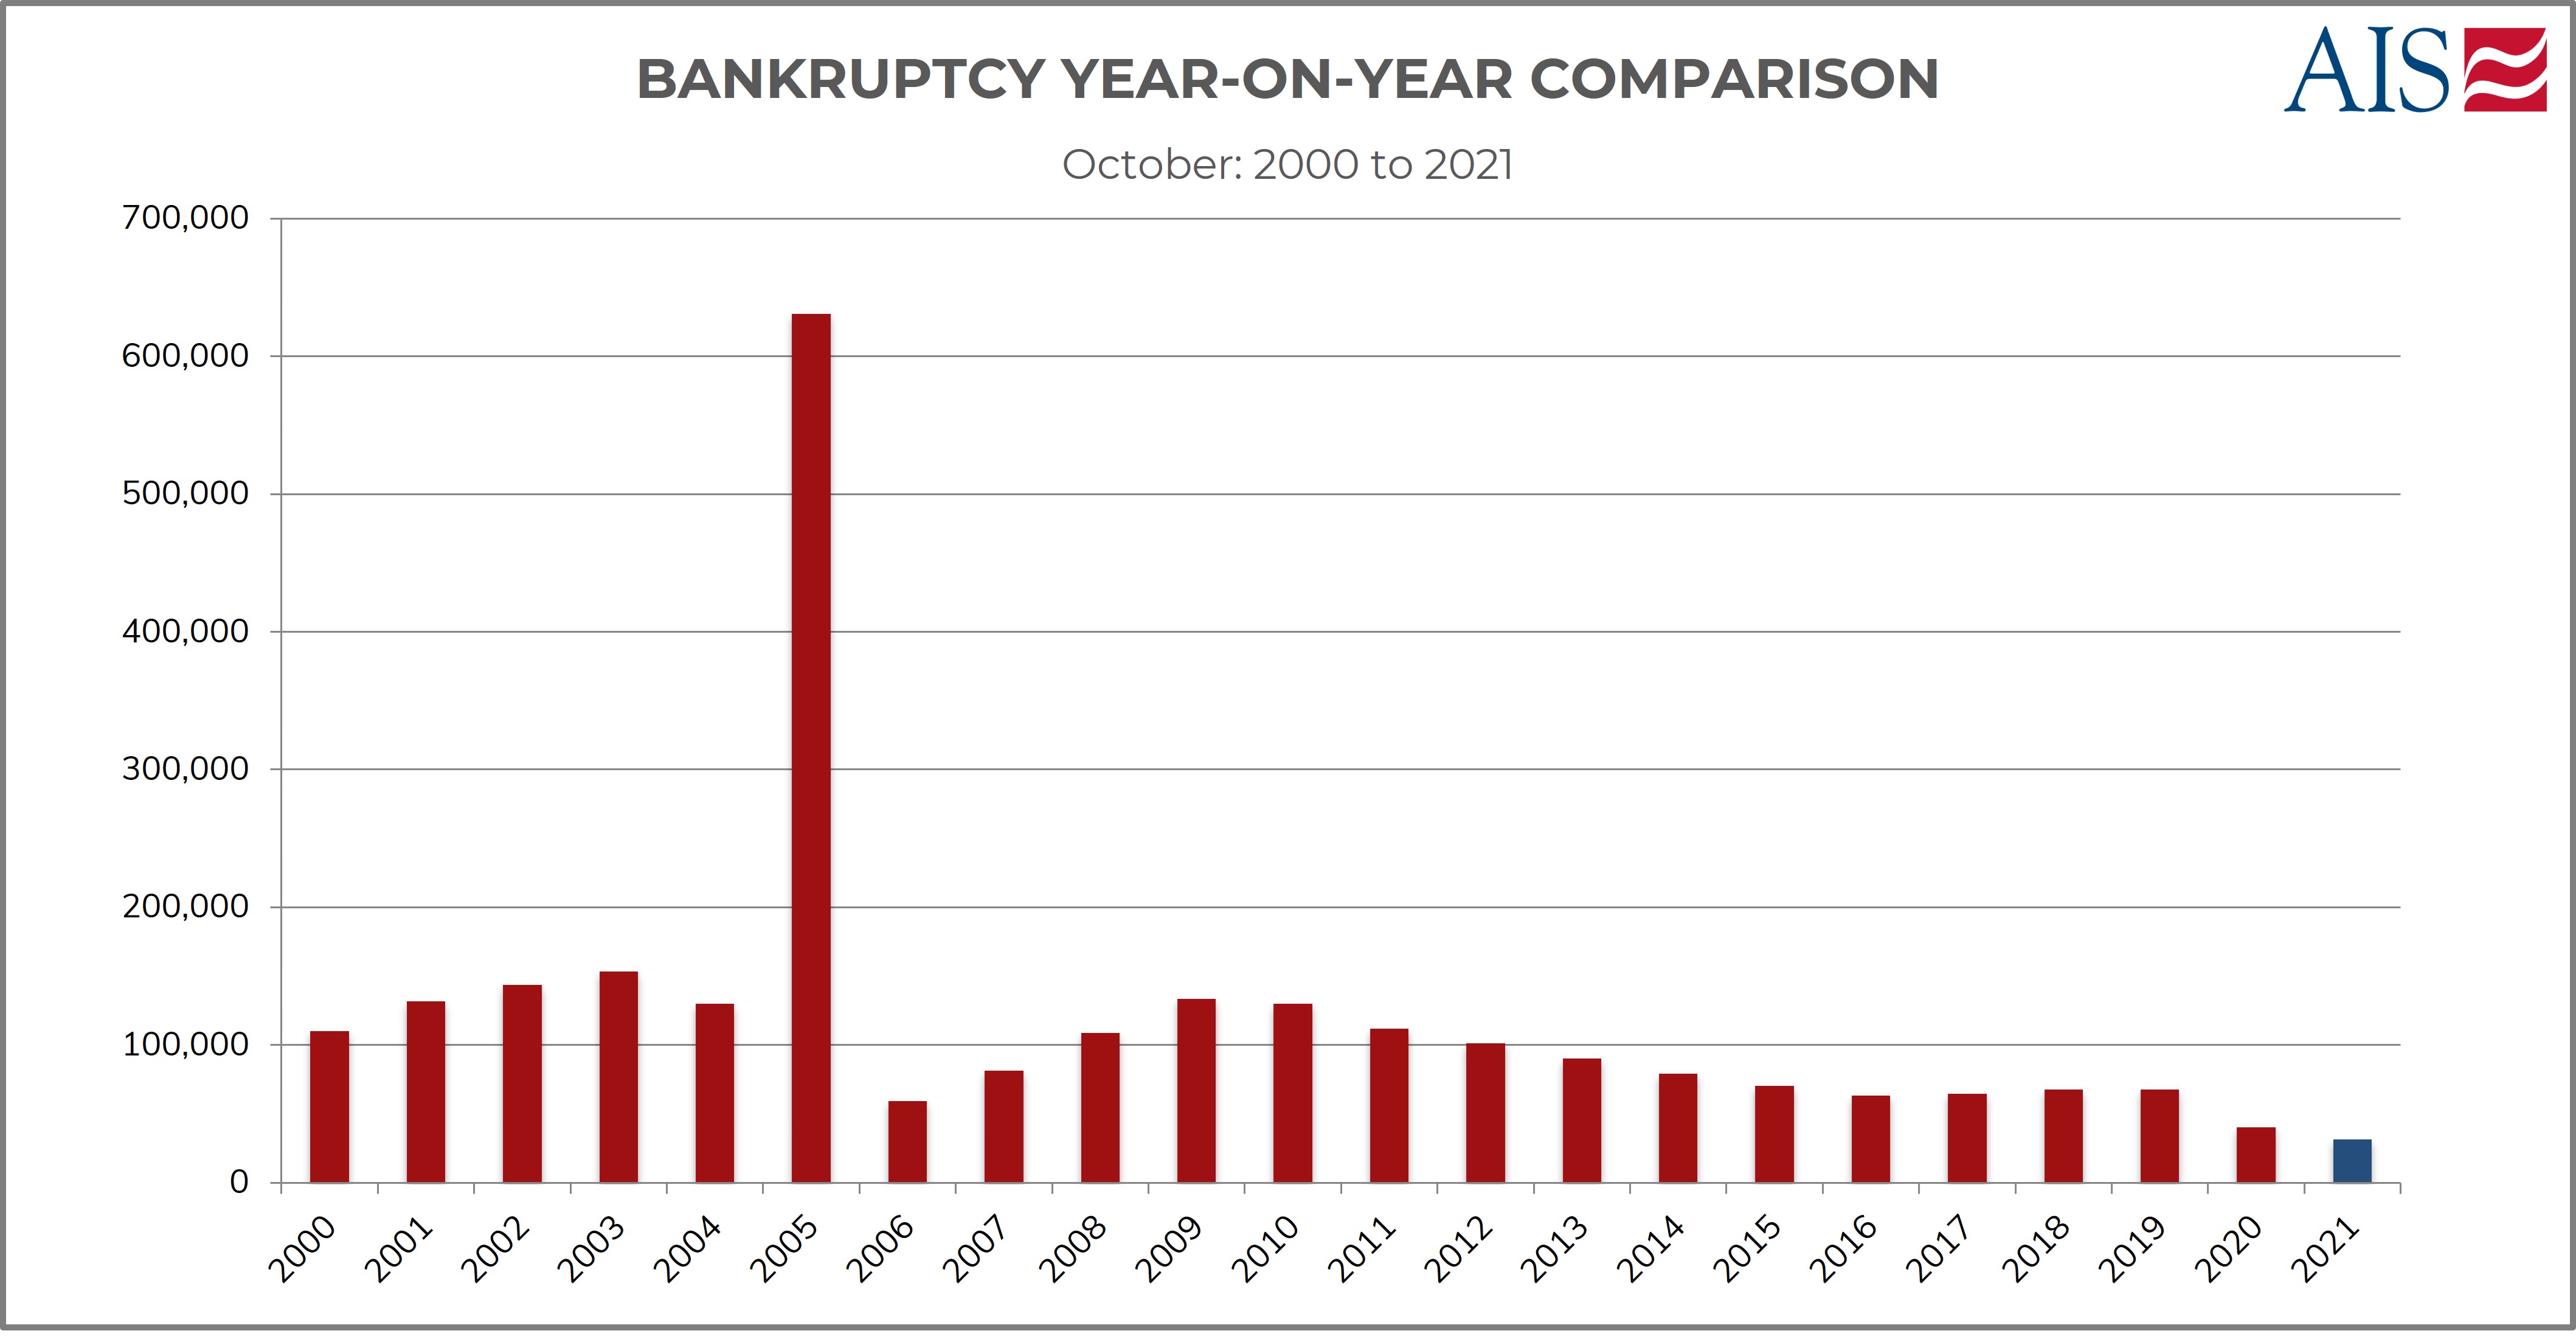 AIS Insight_October 2021_BANKRUPTCY YEAR ON YEAR COMPARISON-1